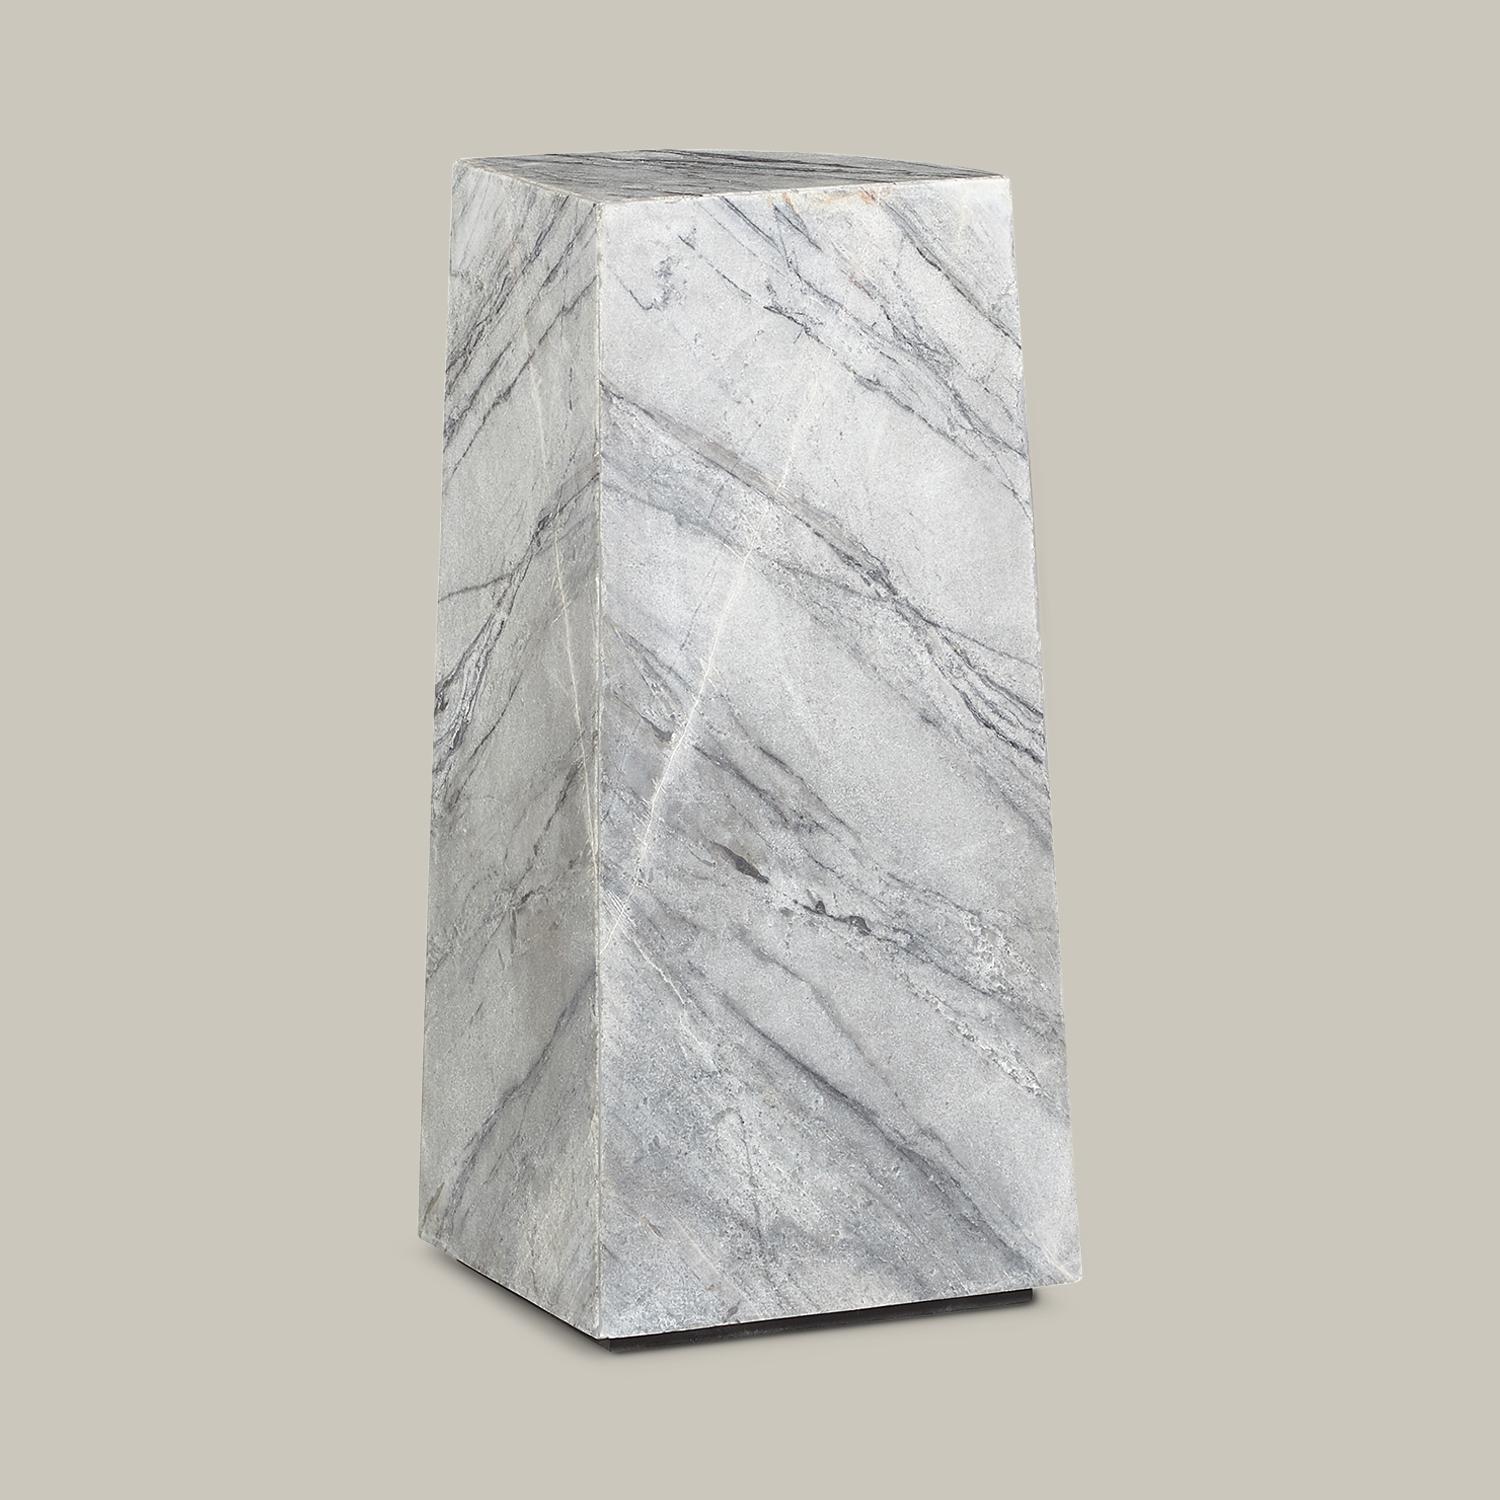 Blue forest marble forms a functional side table that also works as a pedestal or stand-alone accent sculpture. Stackable. Handmade by artisans in Vietnam, the side piece is a jewel in every space.

